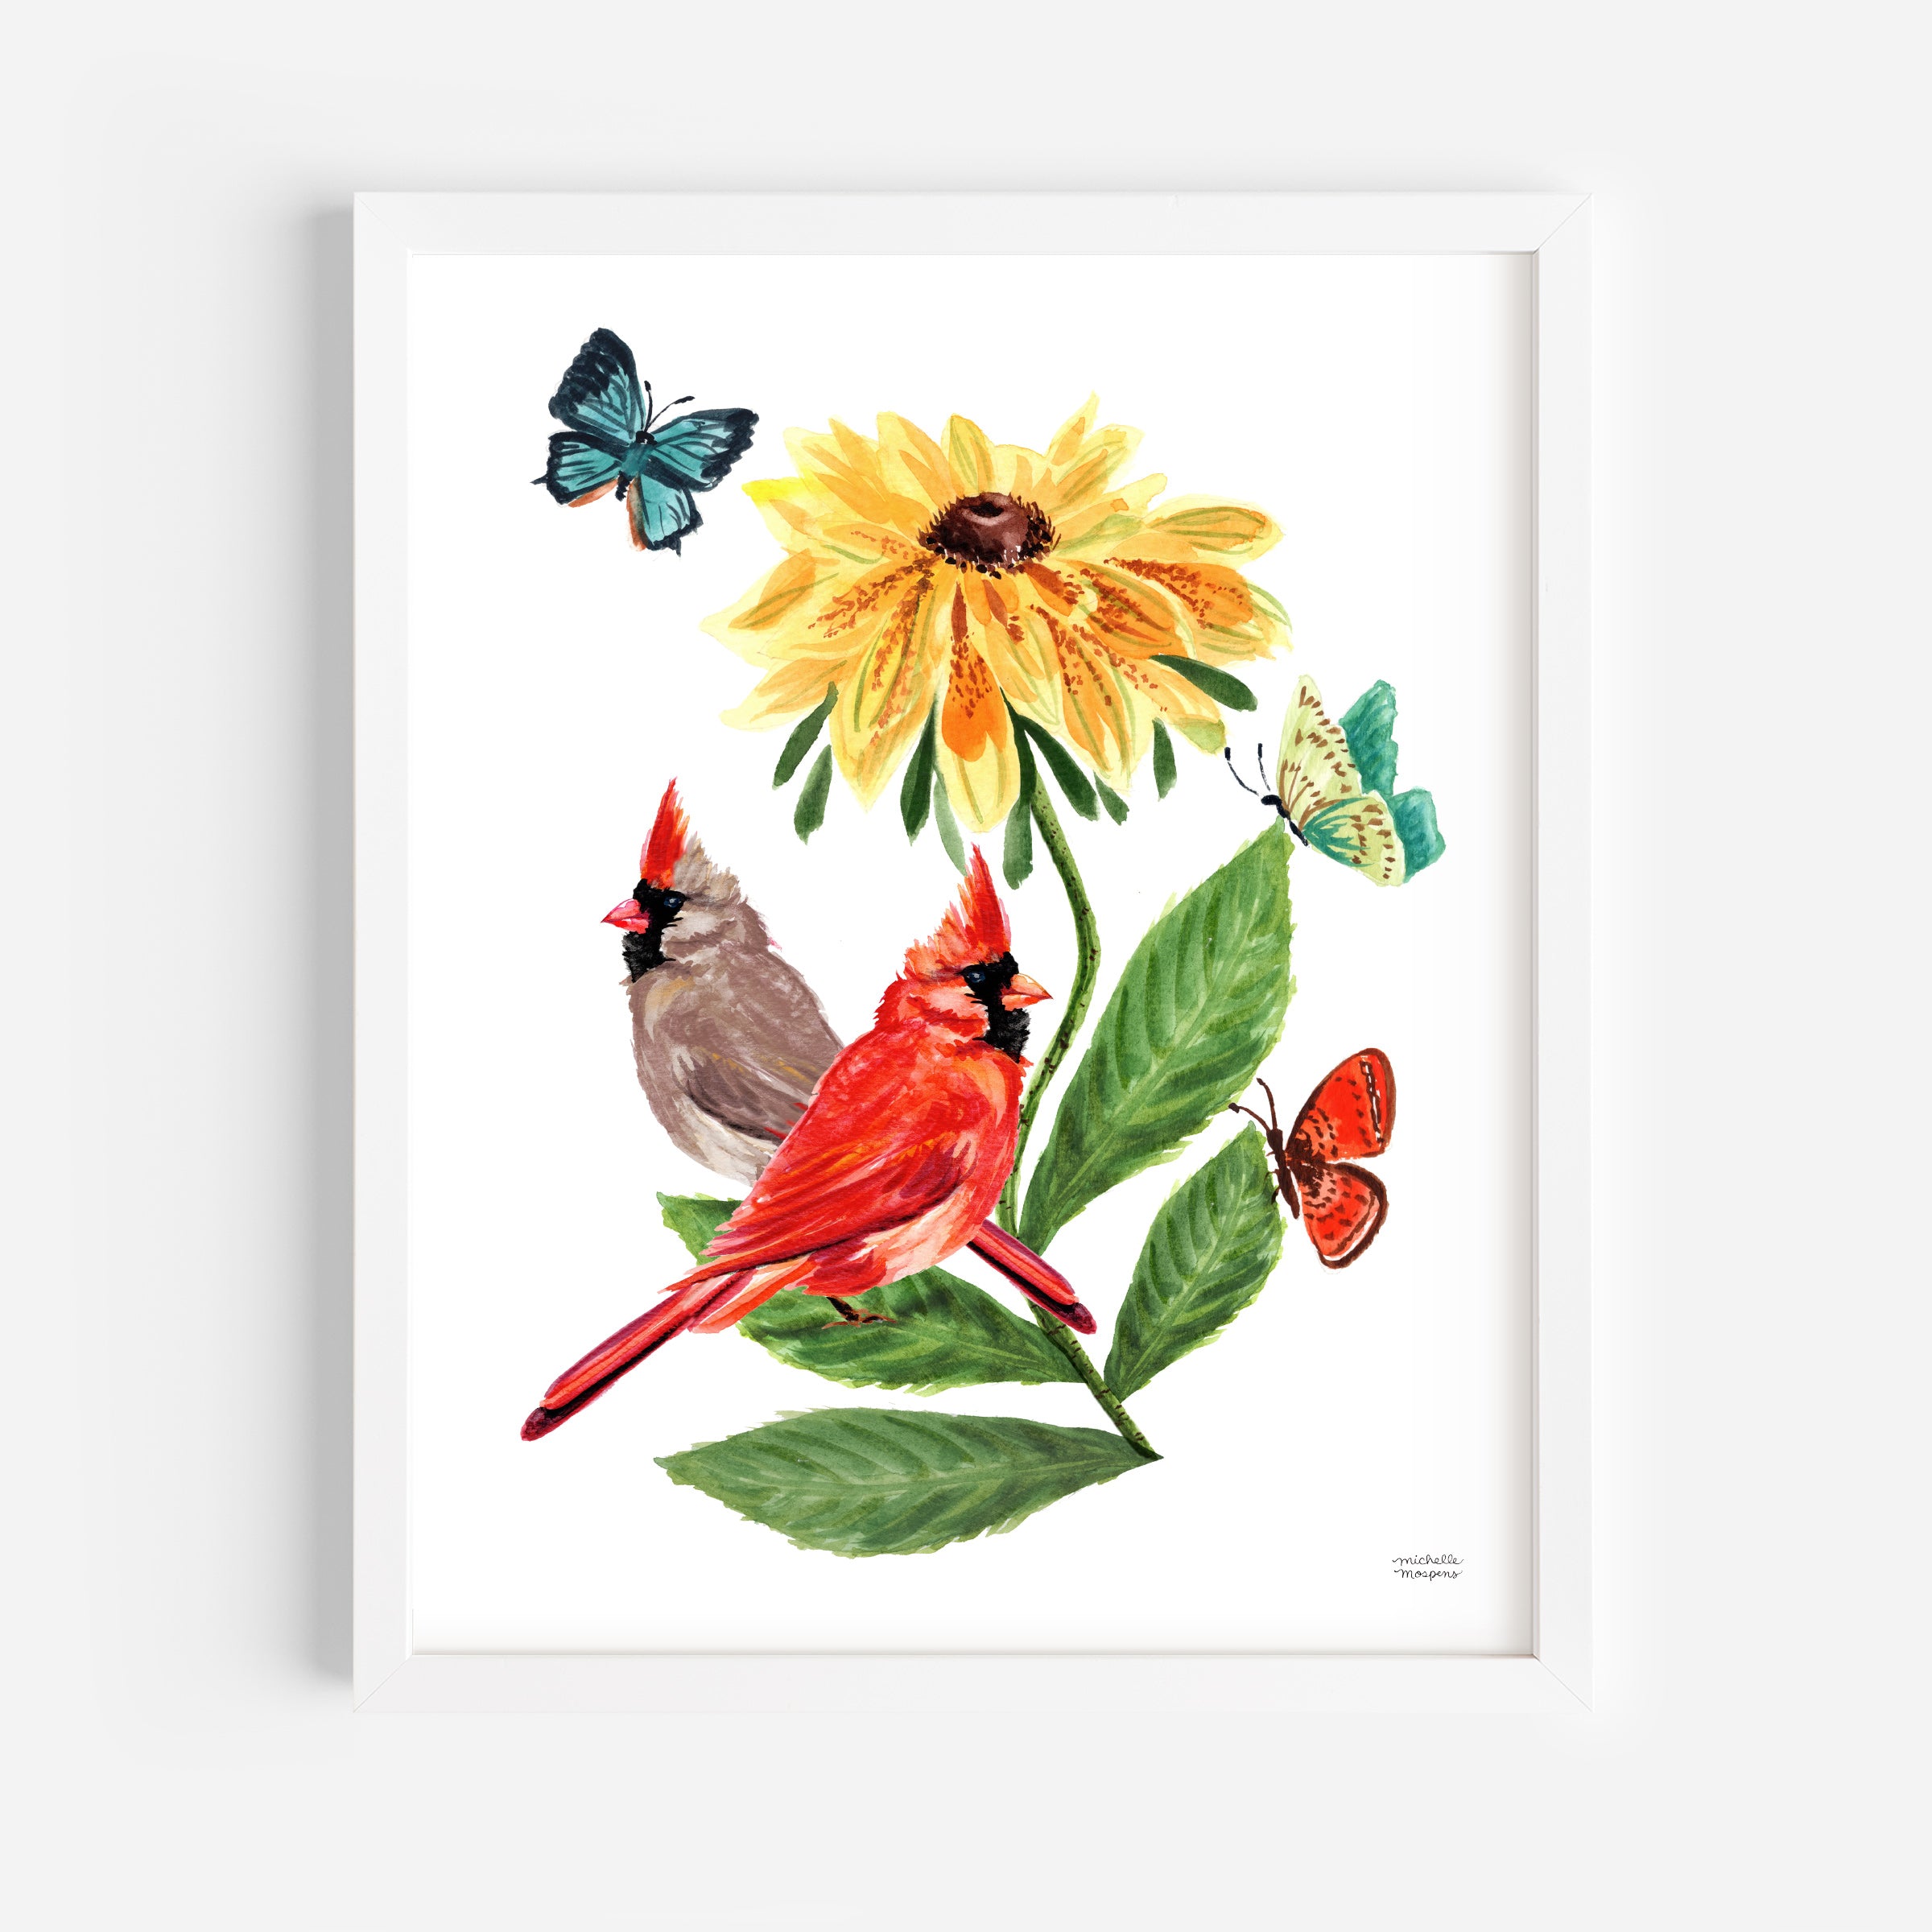 Mr. and Mrs. Cardinal Birds Watercolor Unframed Wall Art Print by Michelle Mospens